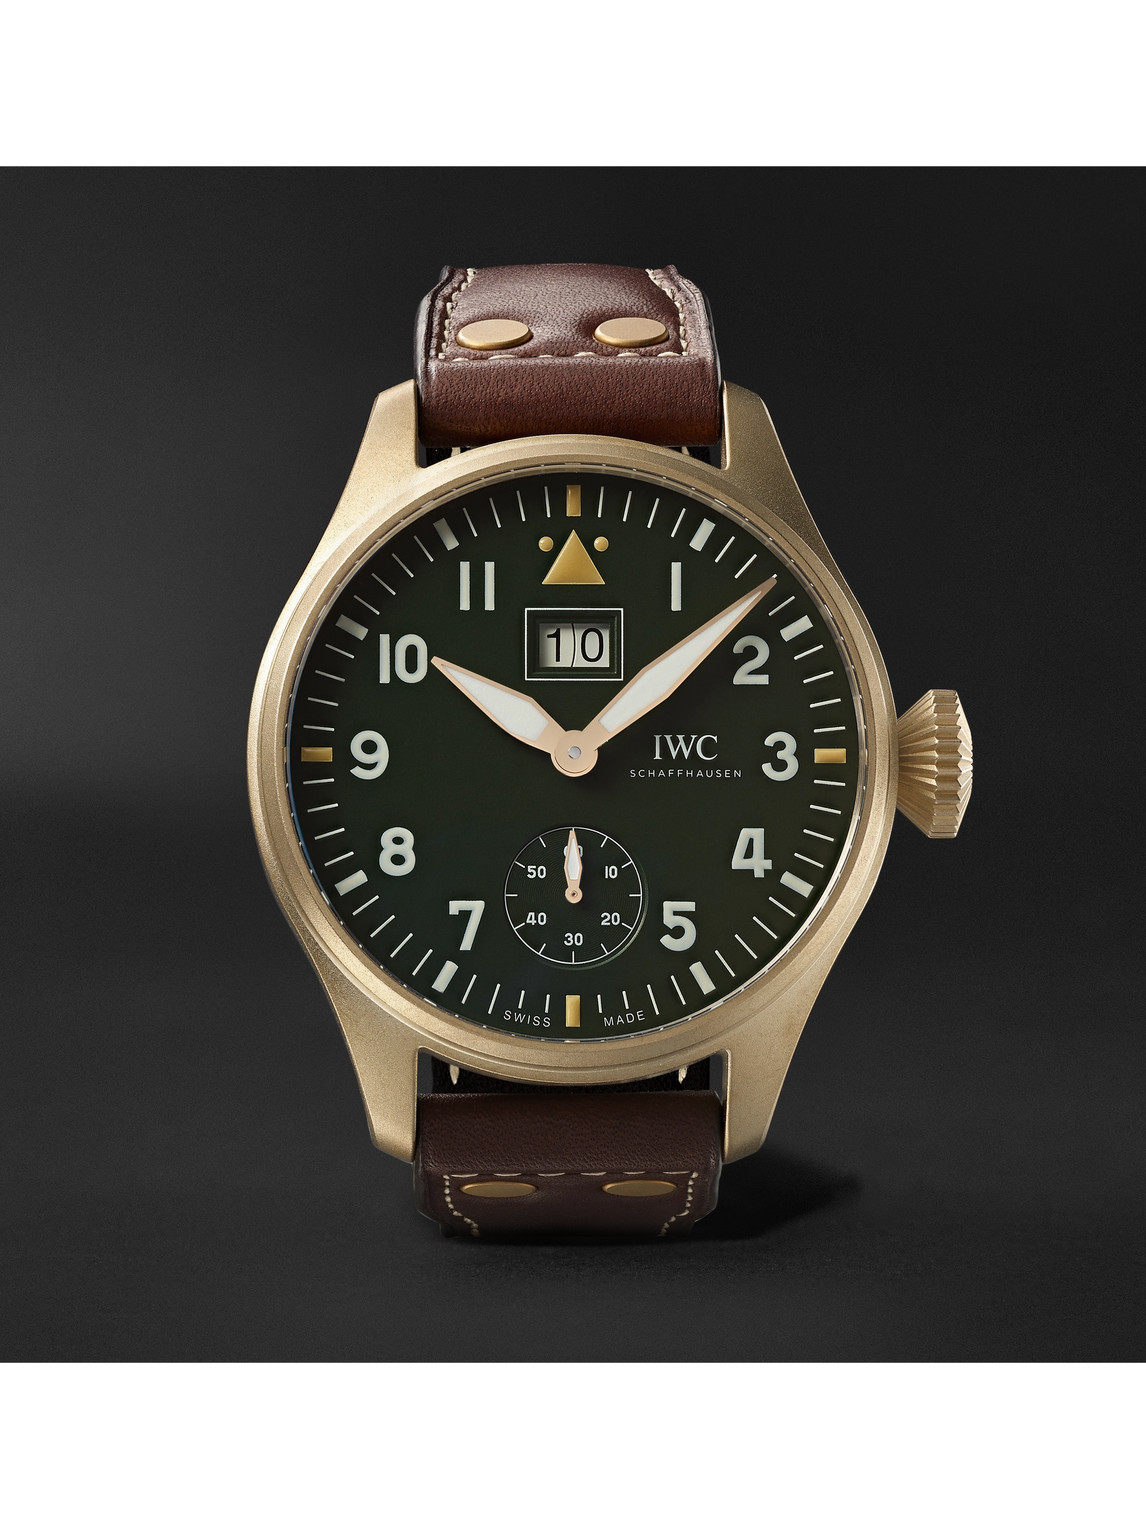 Big Pilot's Big Date Spitfire ‘Mission Accomplished’ Limited Edition Hand-Wound 46.2mm Bronze and Leather Watch, Ref. No. IW510506